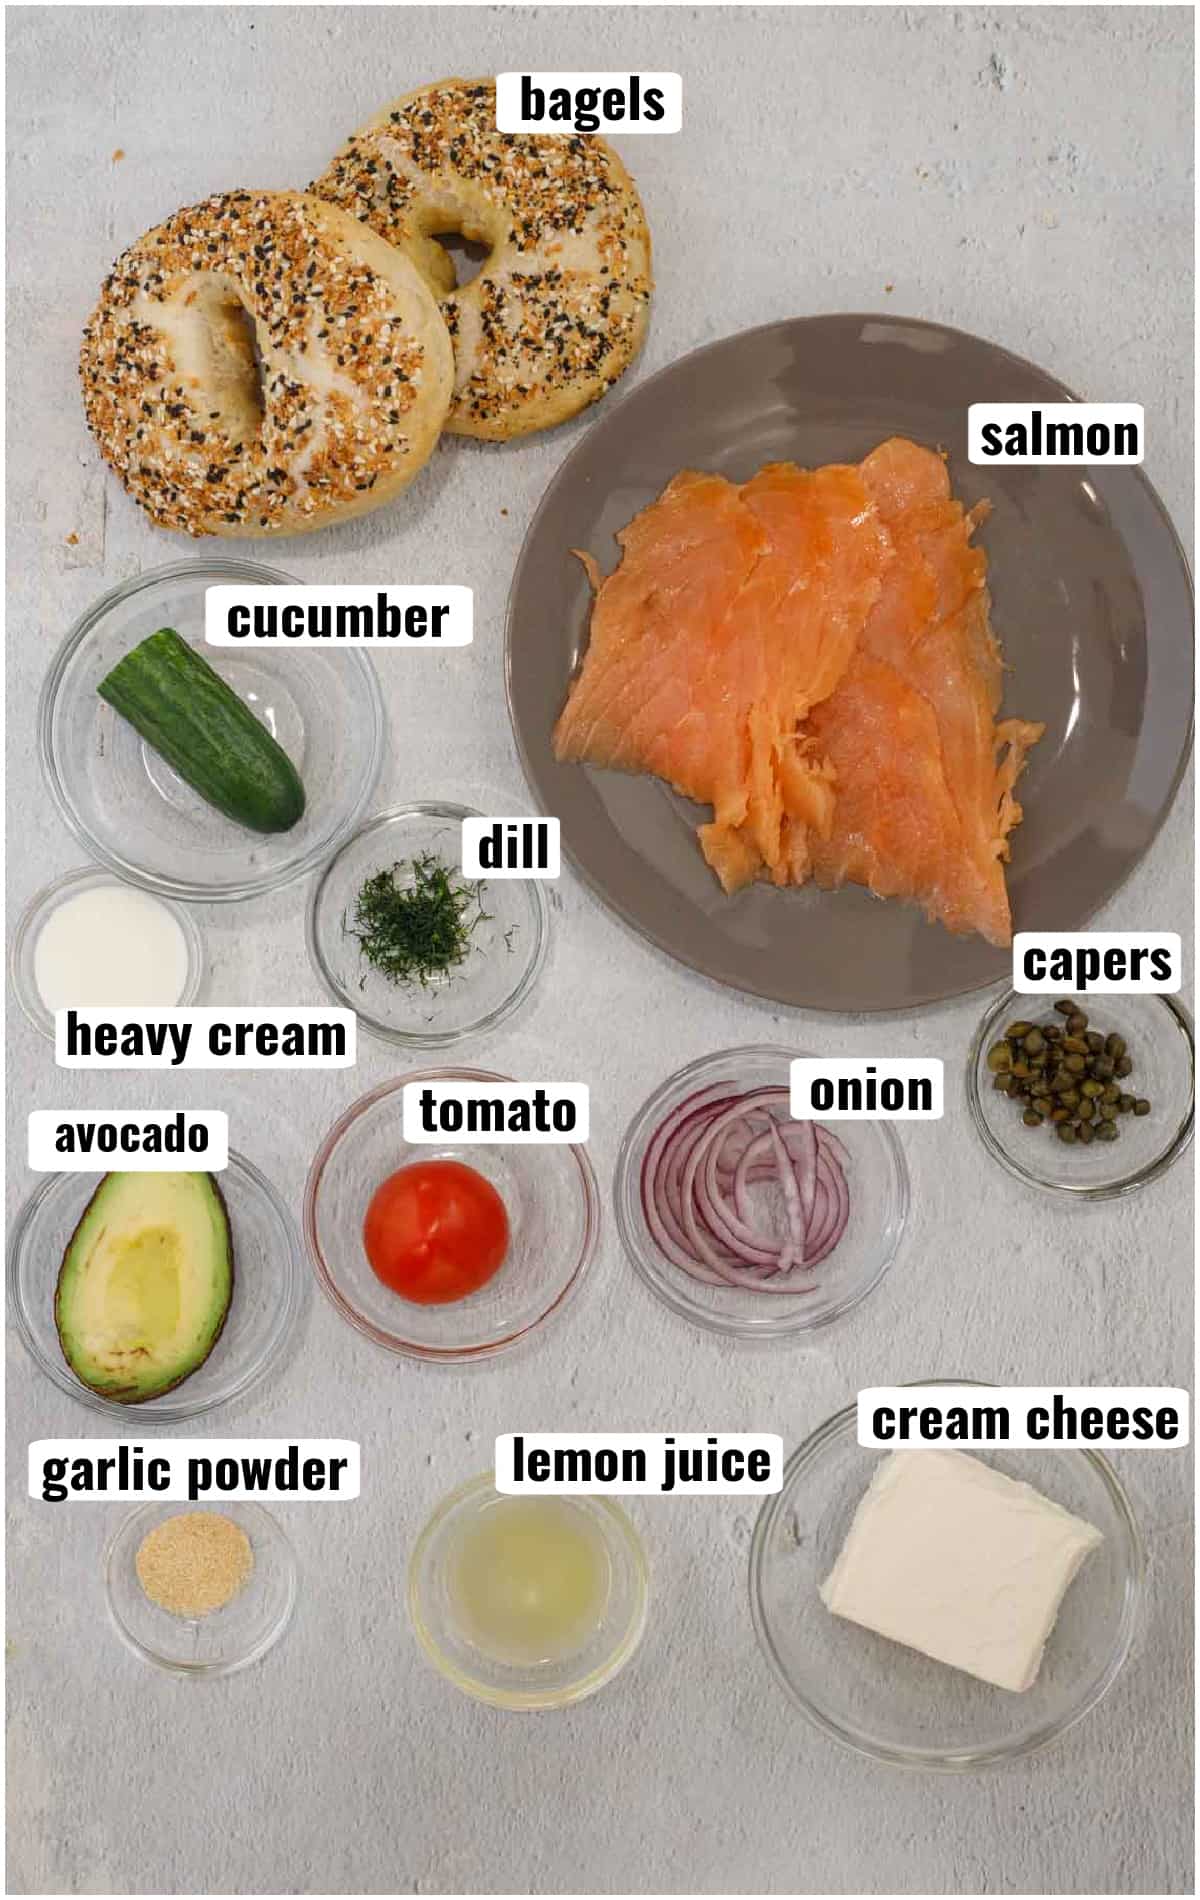 Ingredients for how to make salmon bagel.